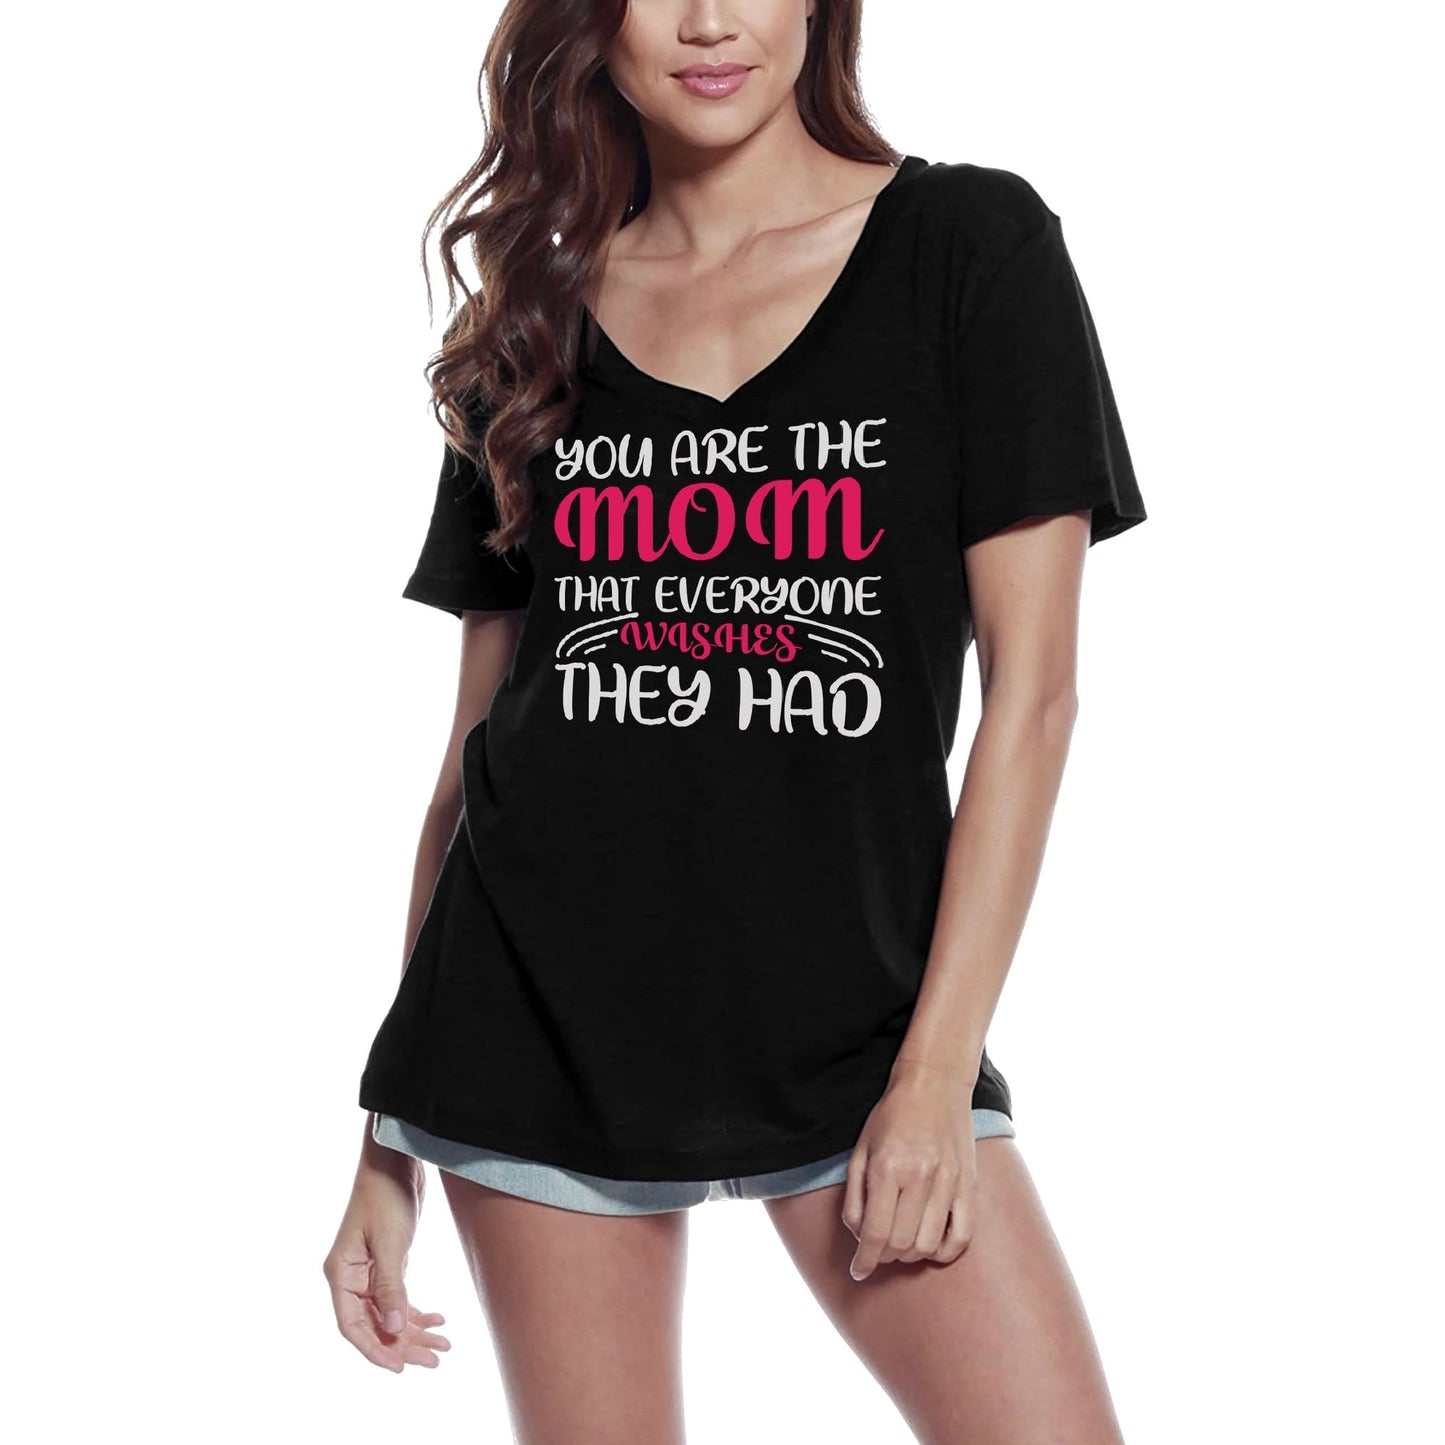 ULTRABASIC Women's T-Shirt You are the Mom That Everyone Wishes They Had - Short Sleeve Tee Shirt Tops